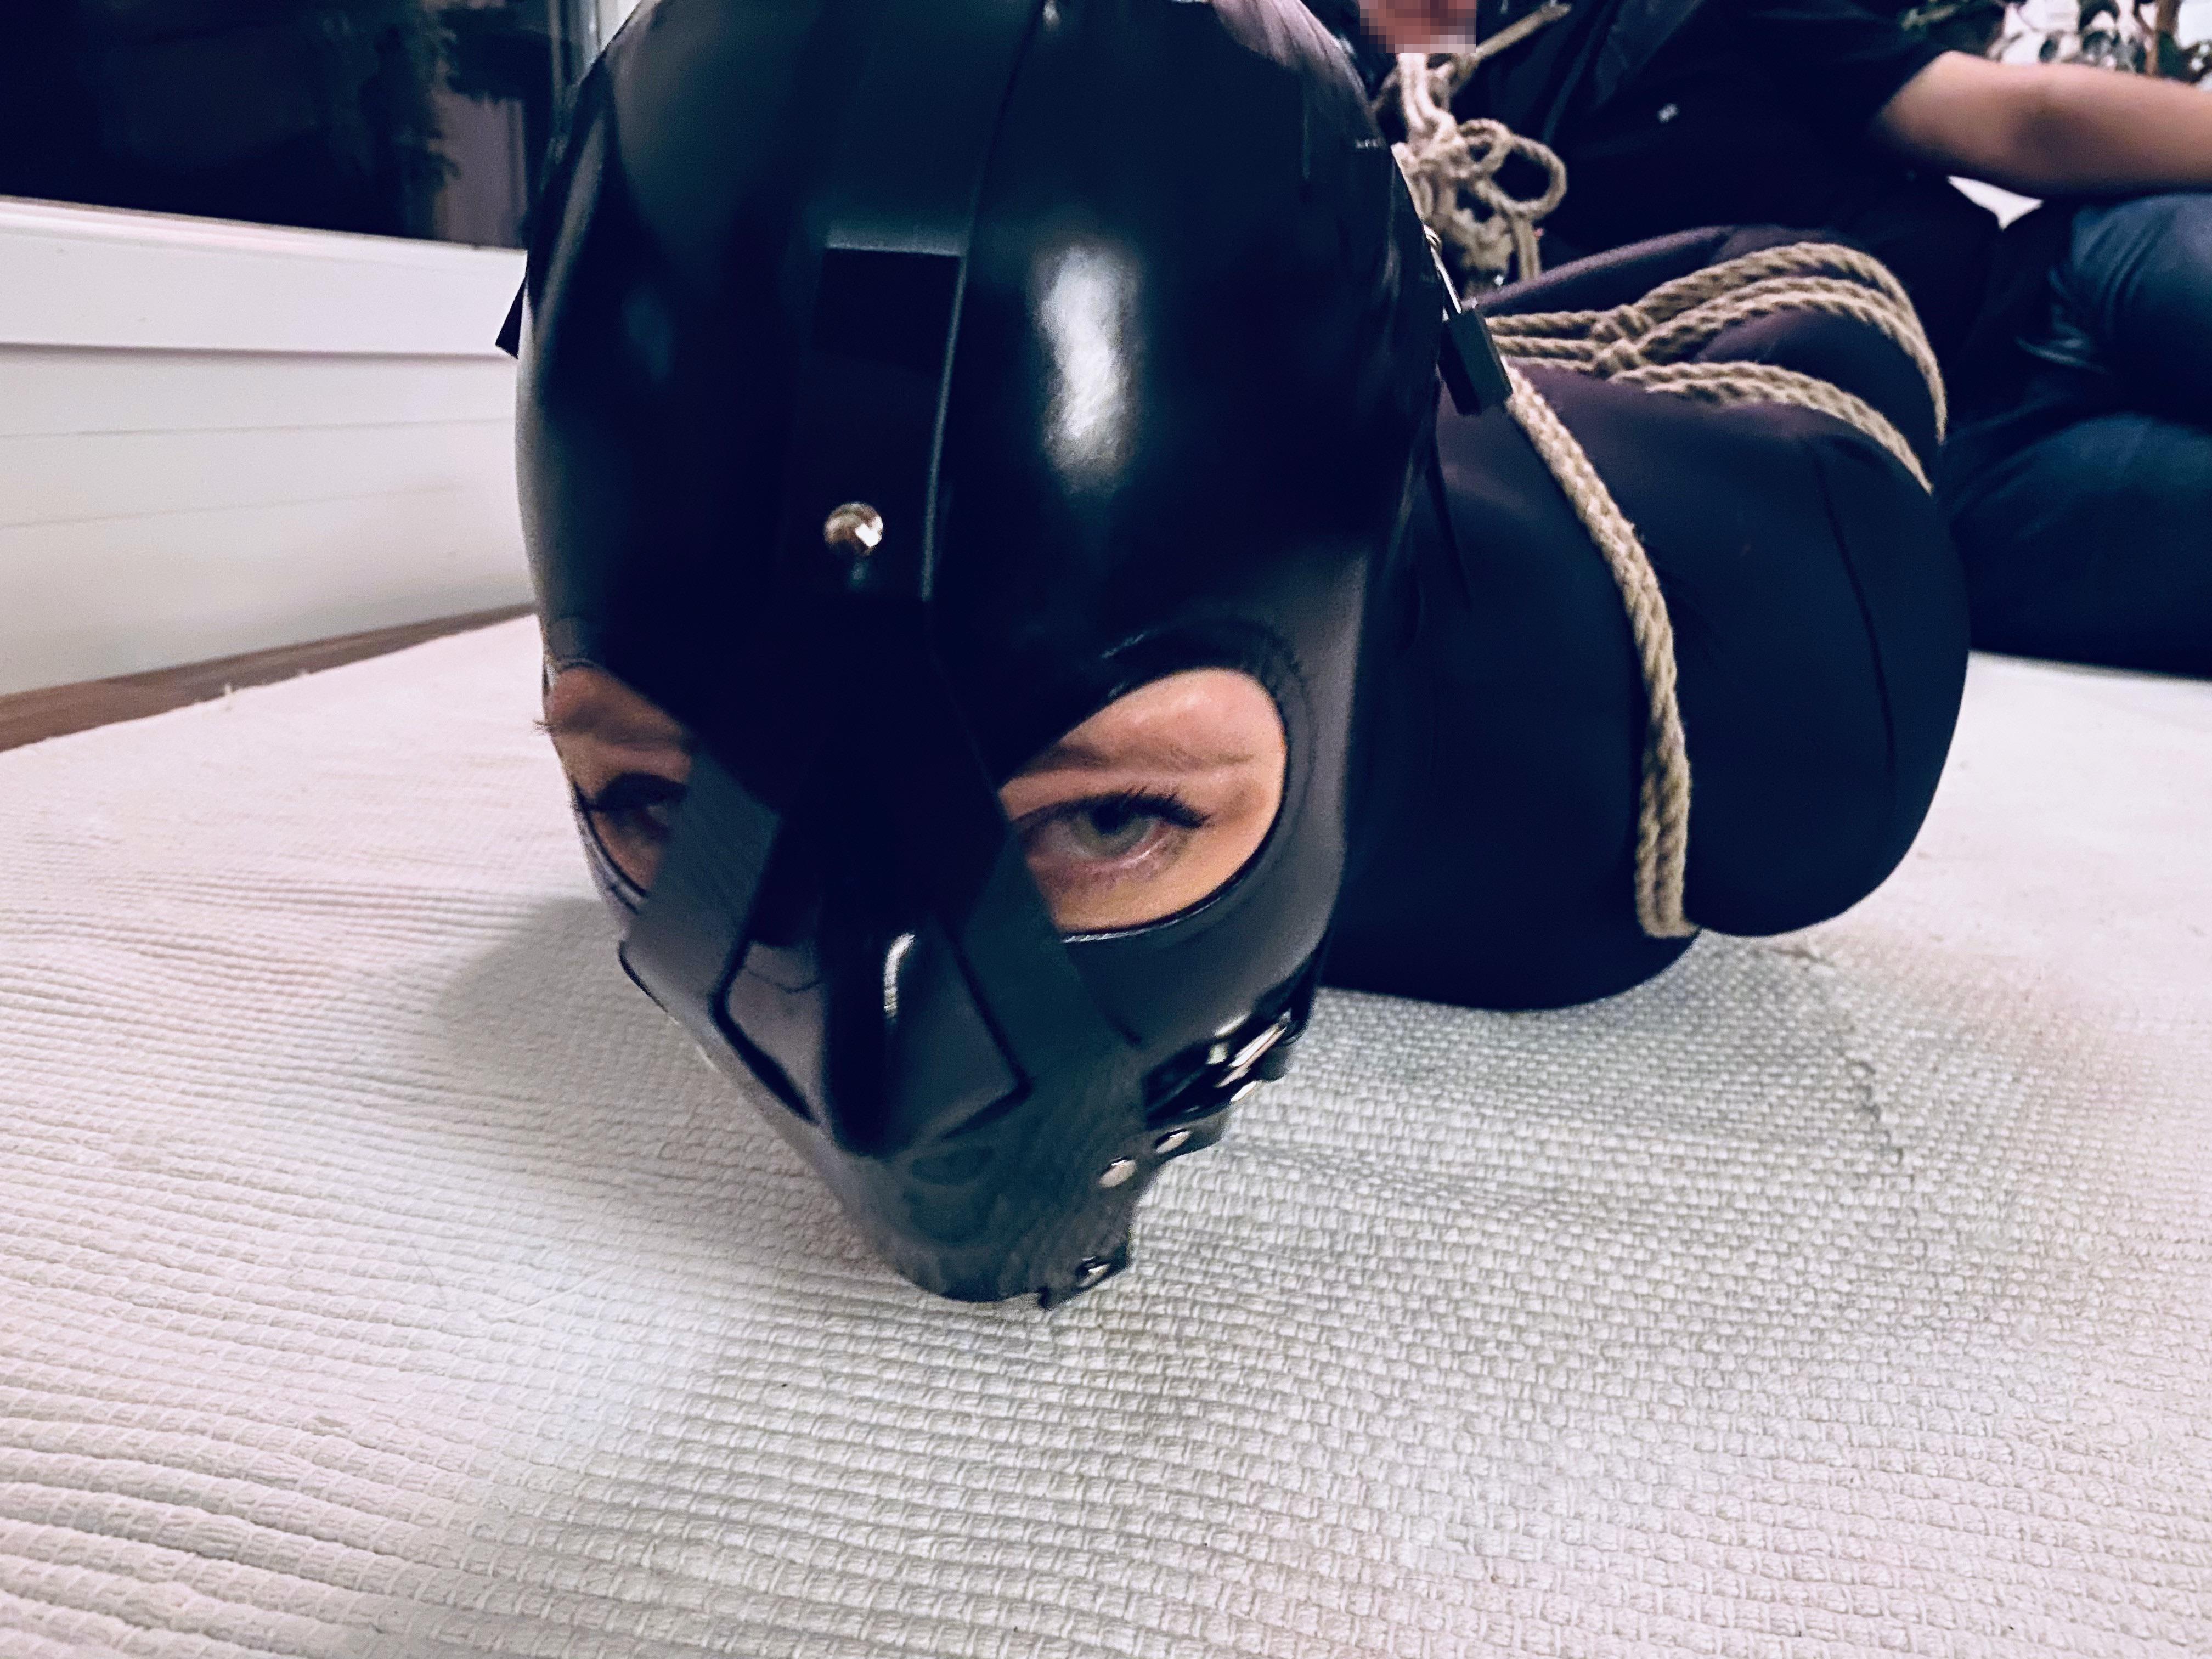 Being Hogtied With An Anal Hook And Silenced With A Mouth Gag This Fuckdoll Was The Perfect Entertainment For The Guests 🙈☺️